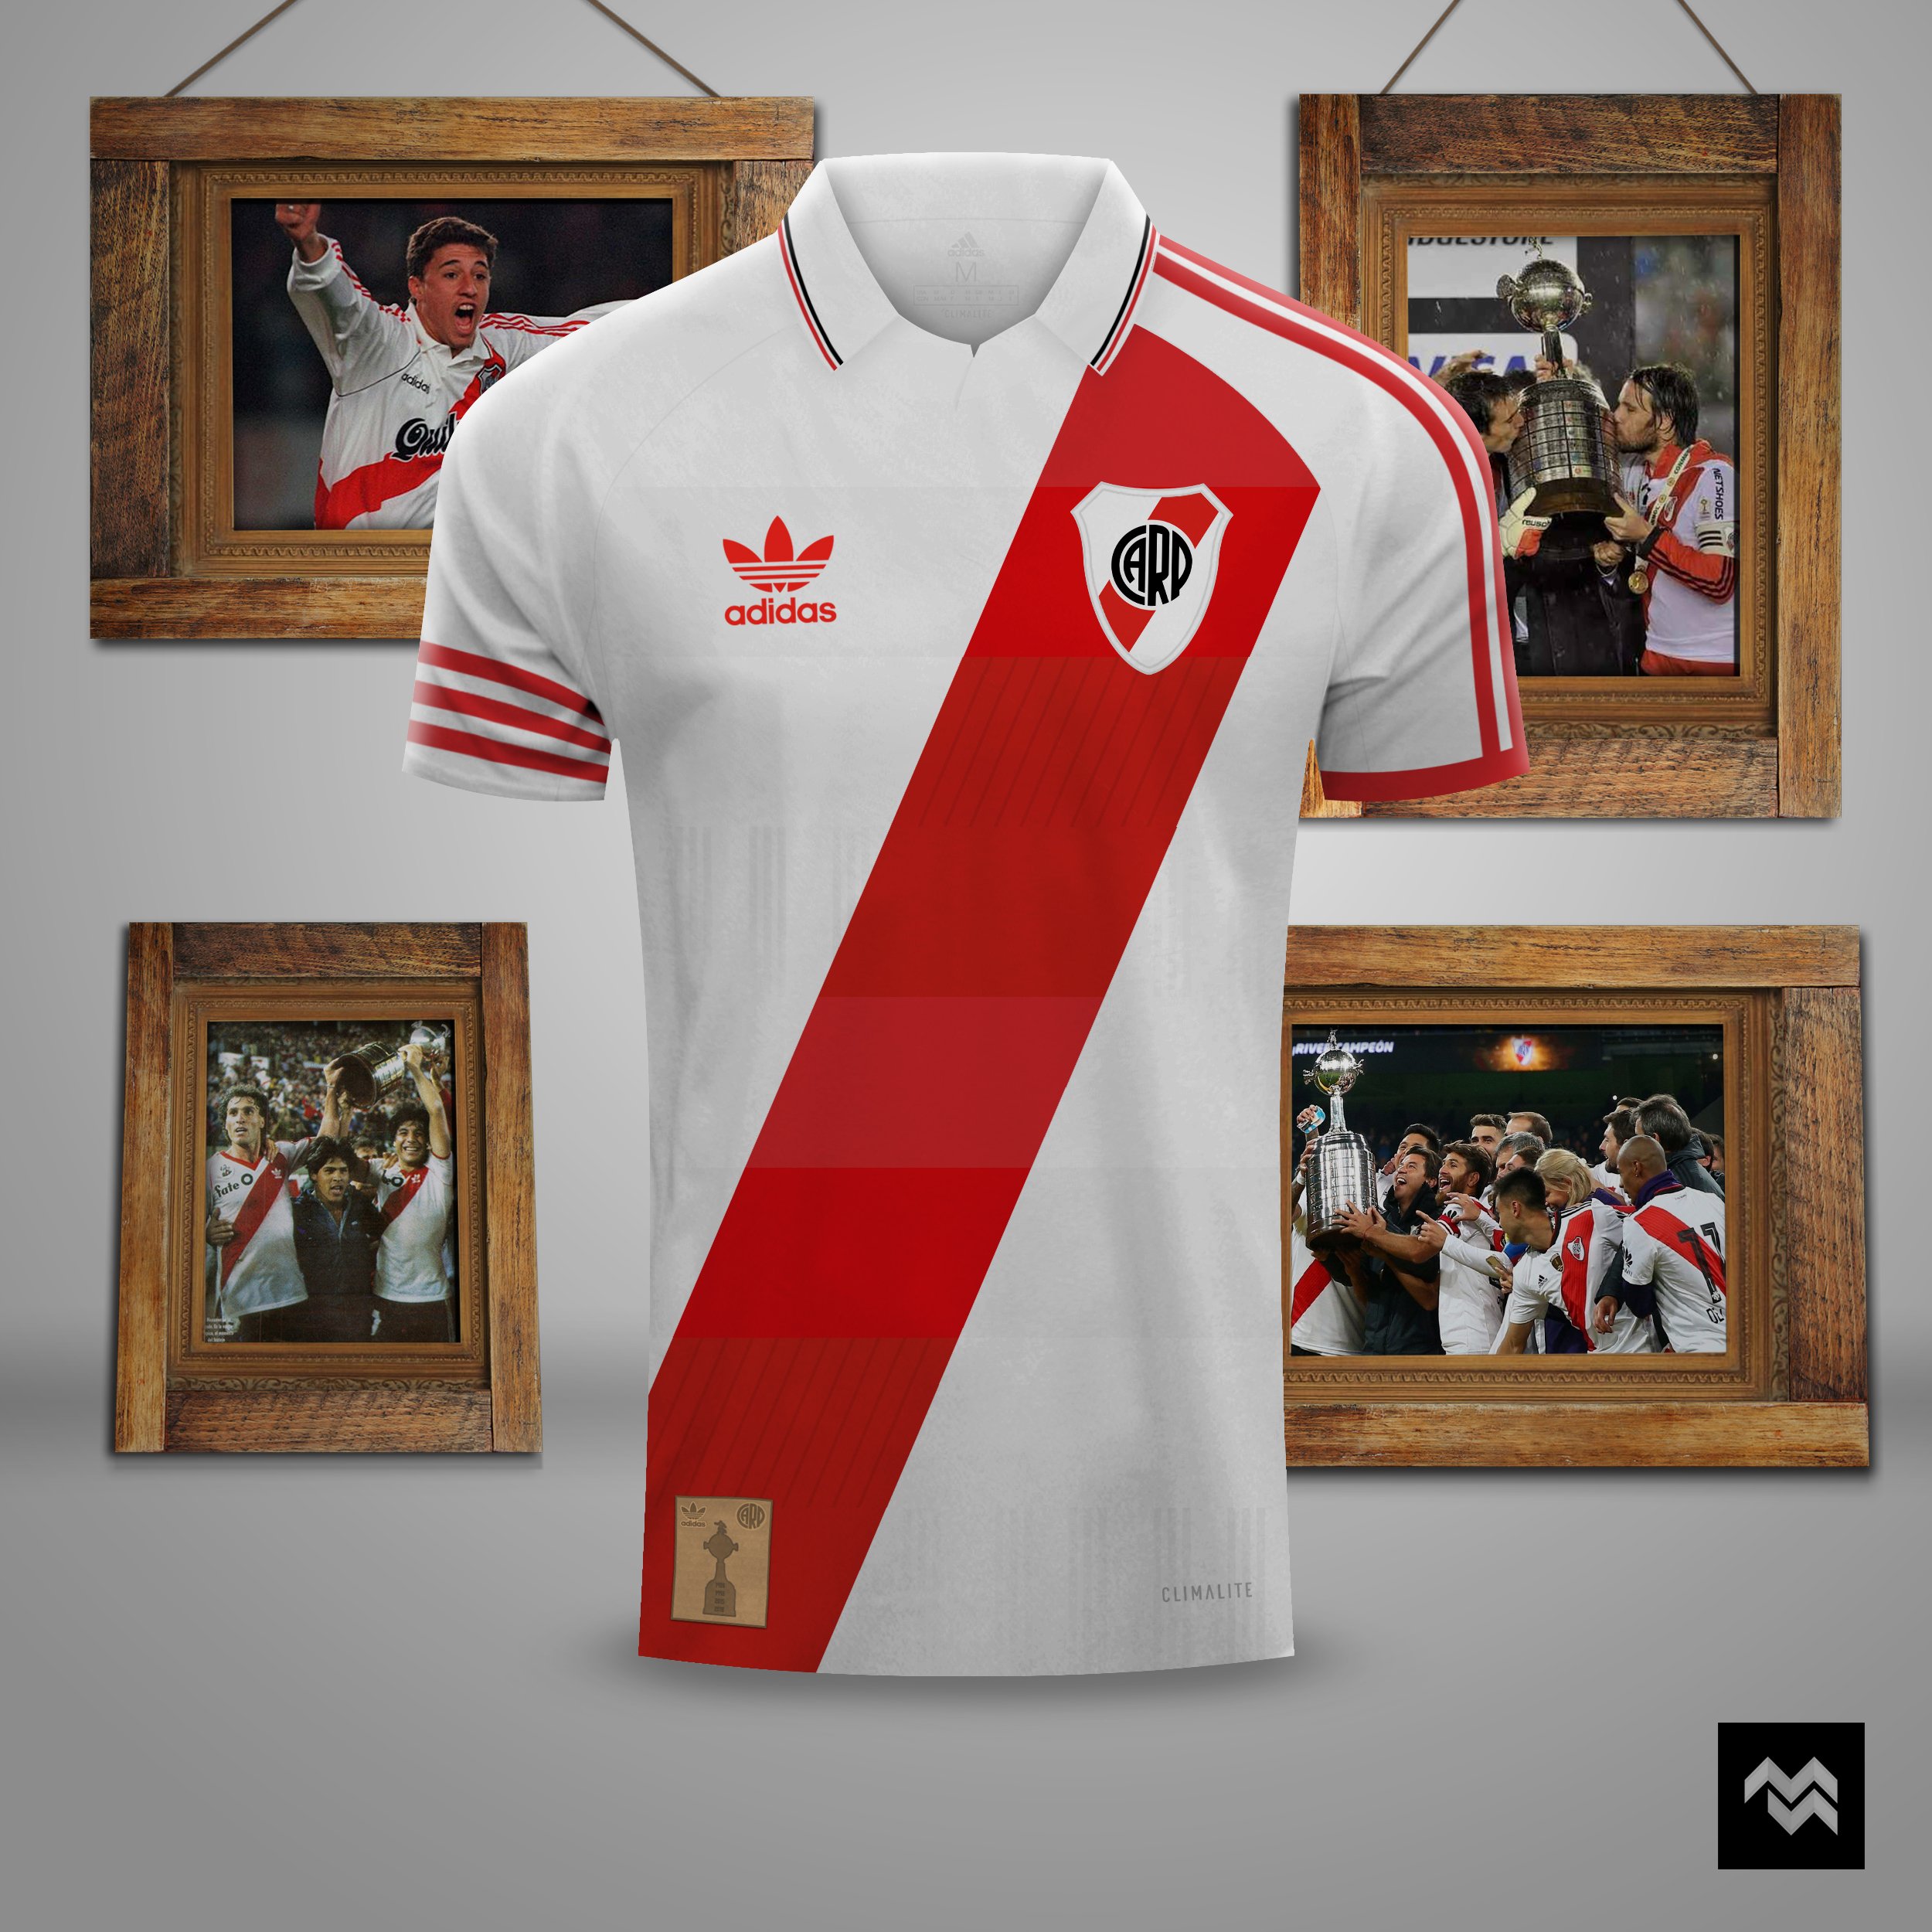 sant - on Twitter: "River Plate x Adidas | Copa Libertadores Patchwork Fantasy I blended different jerseys that River when they won Libertadores cup in 1986, 1996, 2015 and